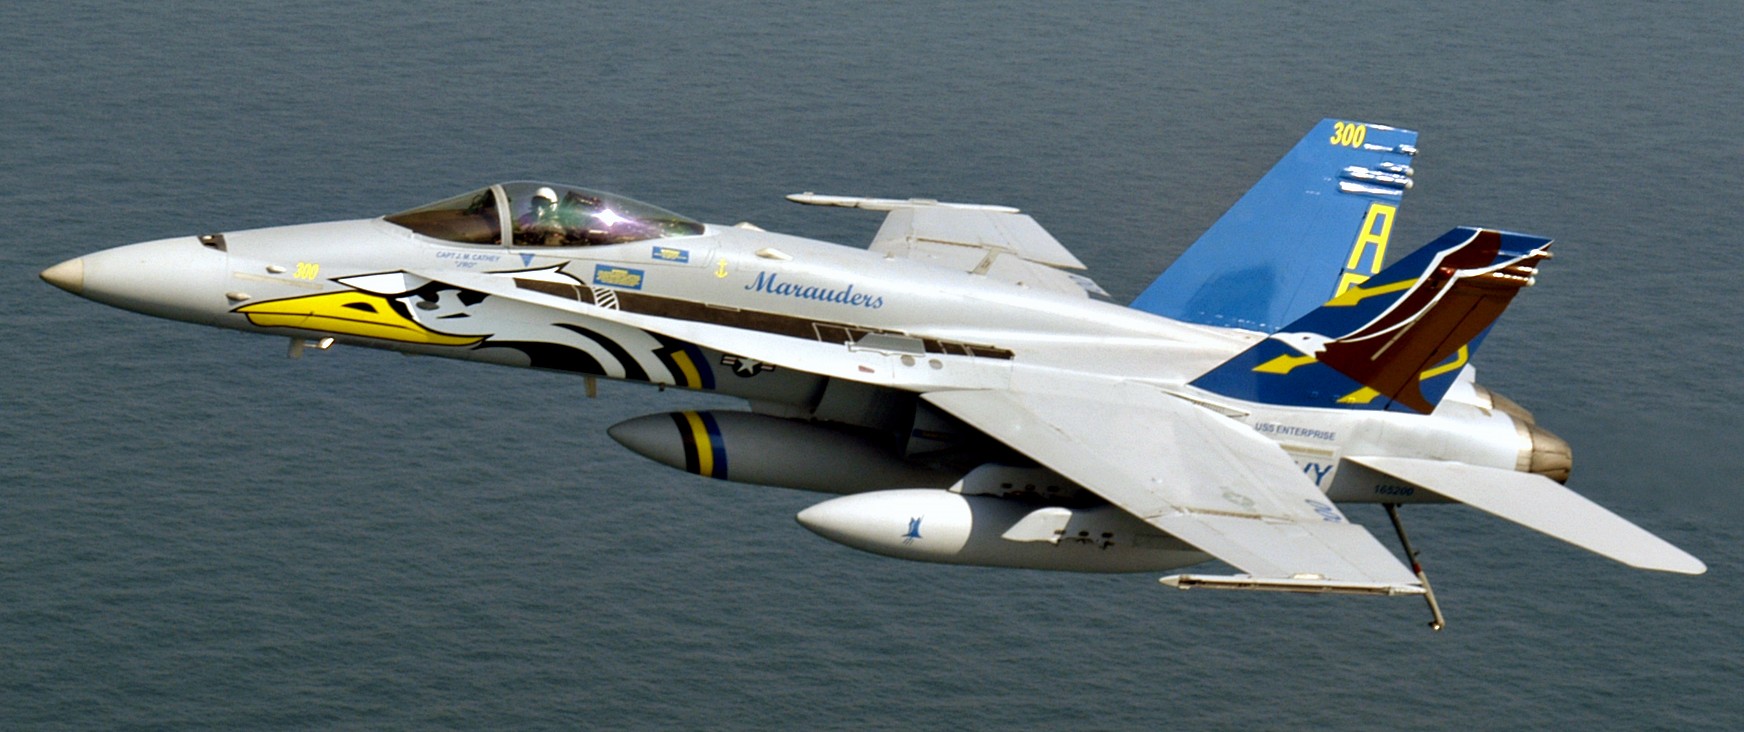 vfa-82 marauders strike fighter squadron f/a-18c hornet us navy 52x